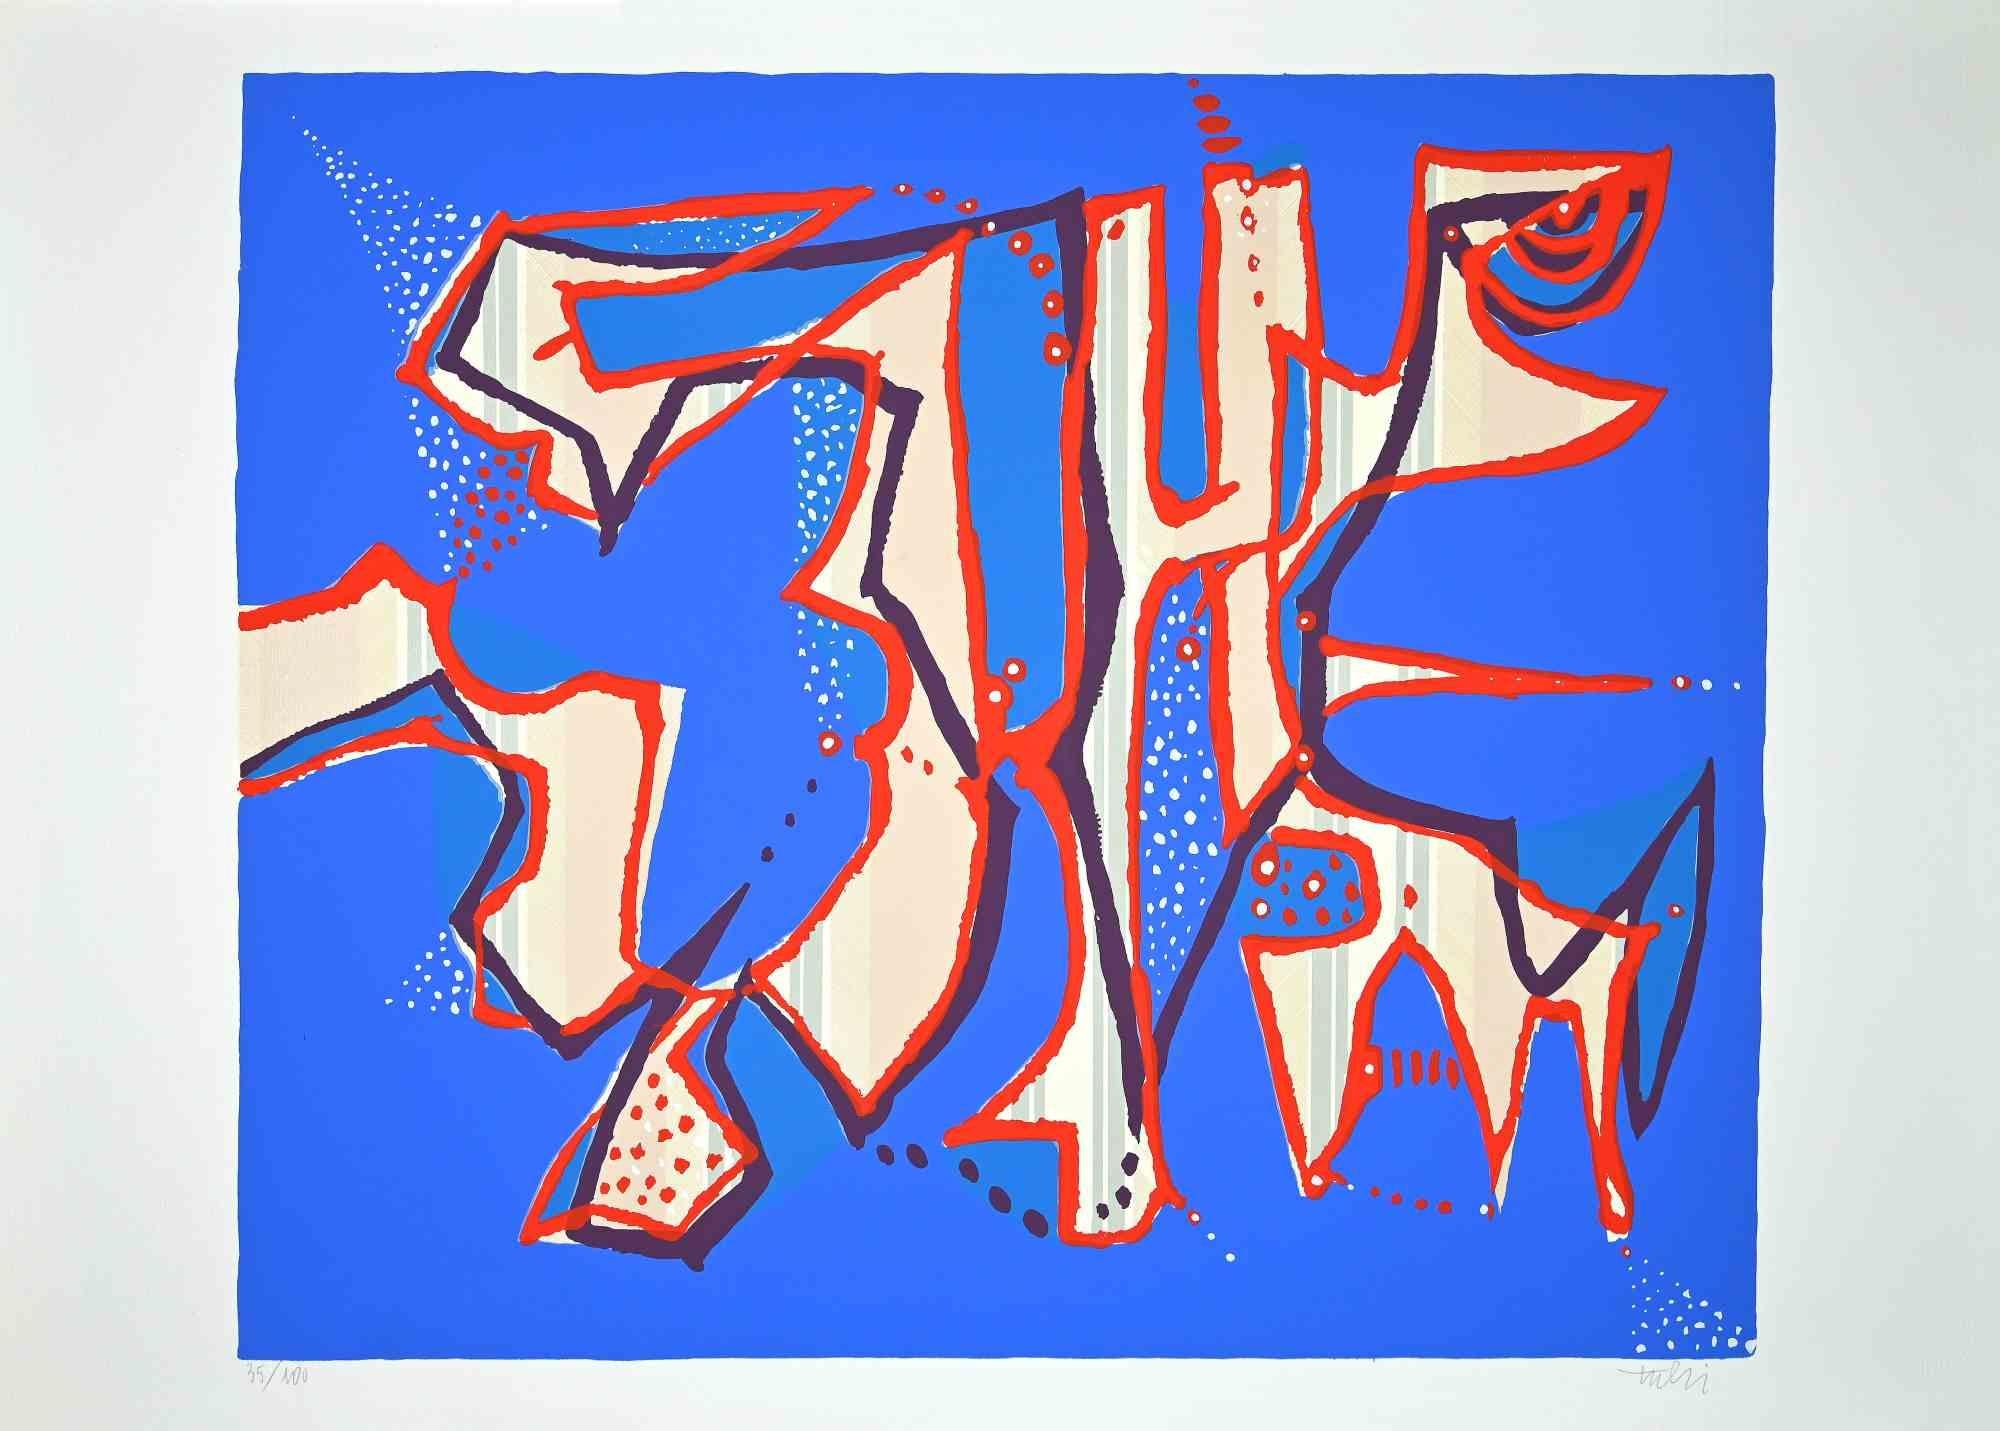 Composition in Blue - Original Screen Print by Wladimiro Tulli - 1970s